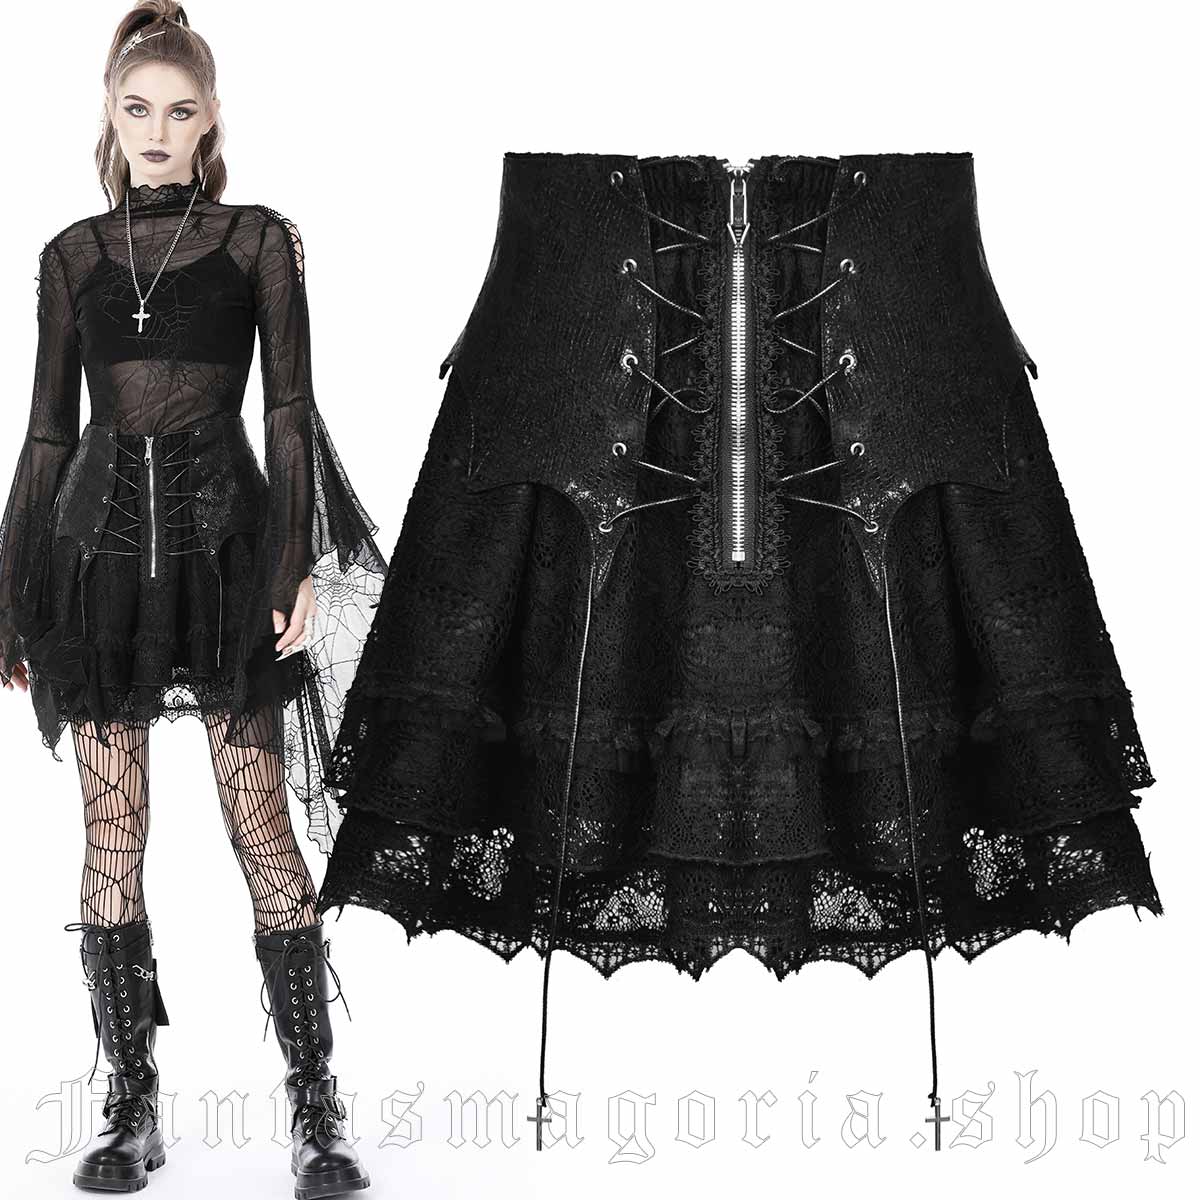 Women's black layered lace and faux leather batwing shape detail short flared skirt. - Dark in Love - KW258